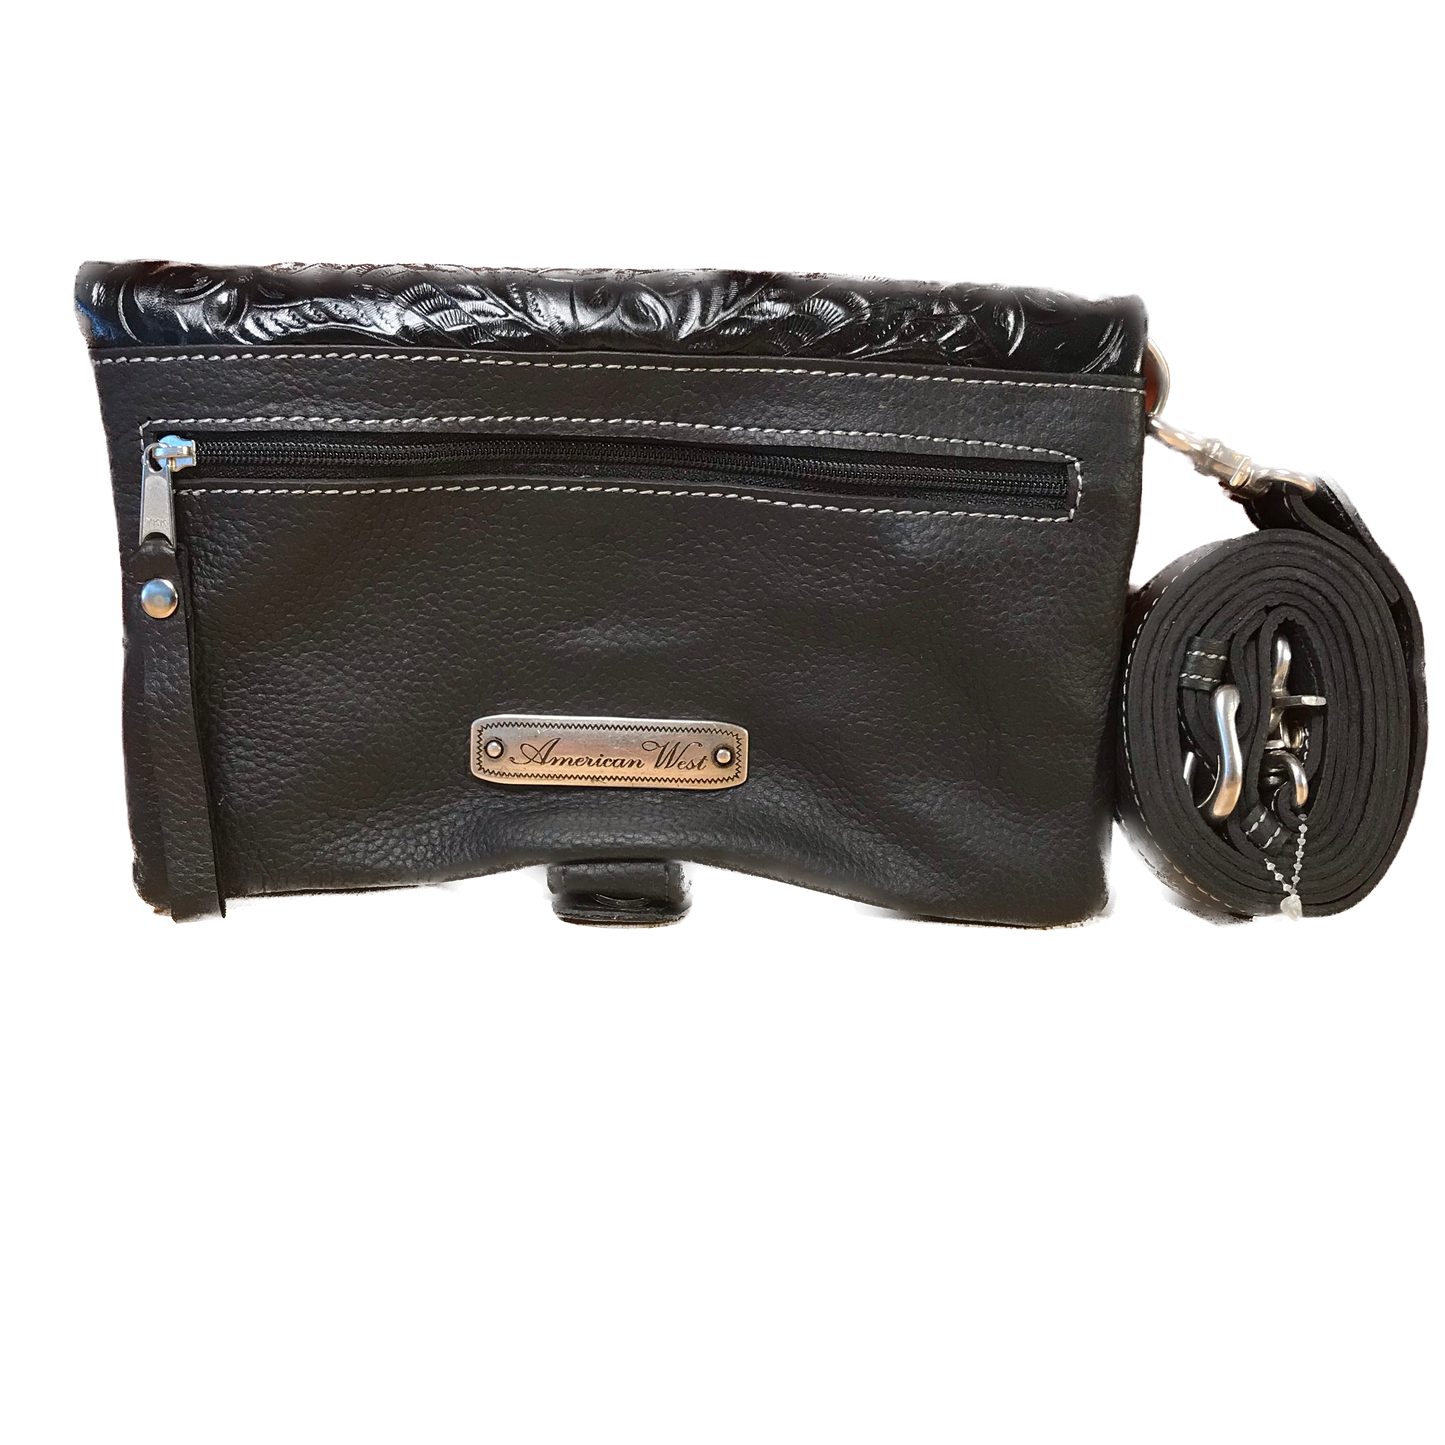 Black Leather Folded Clutch with Detachable Strap